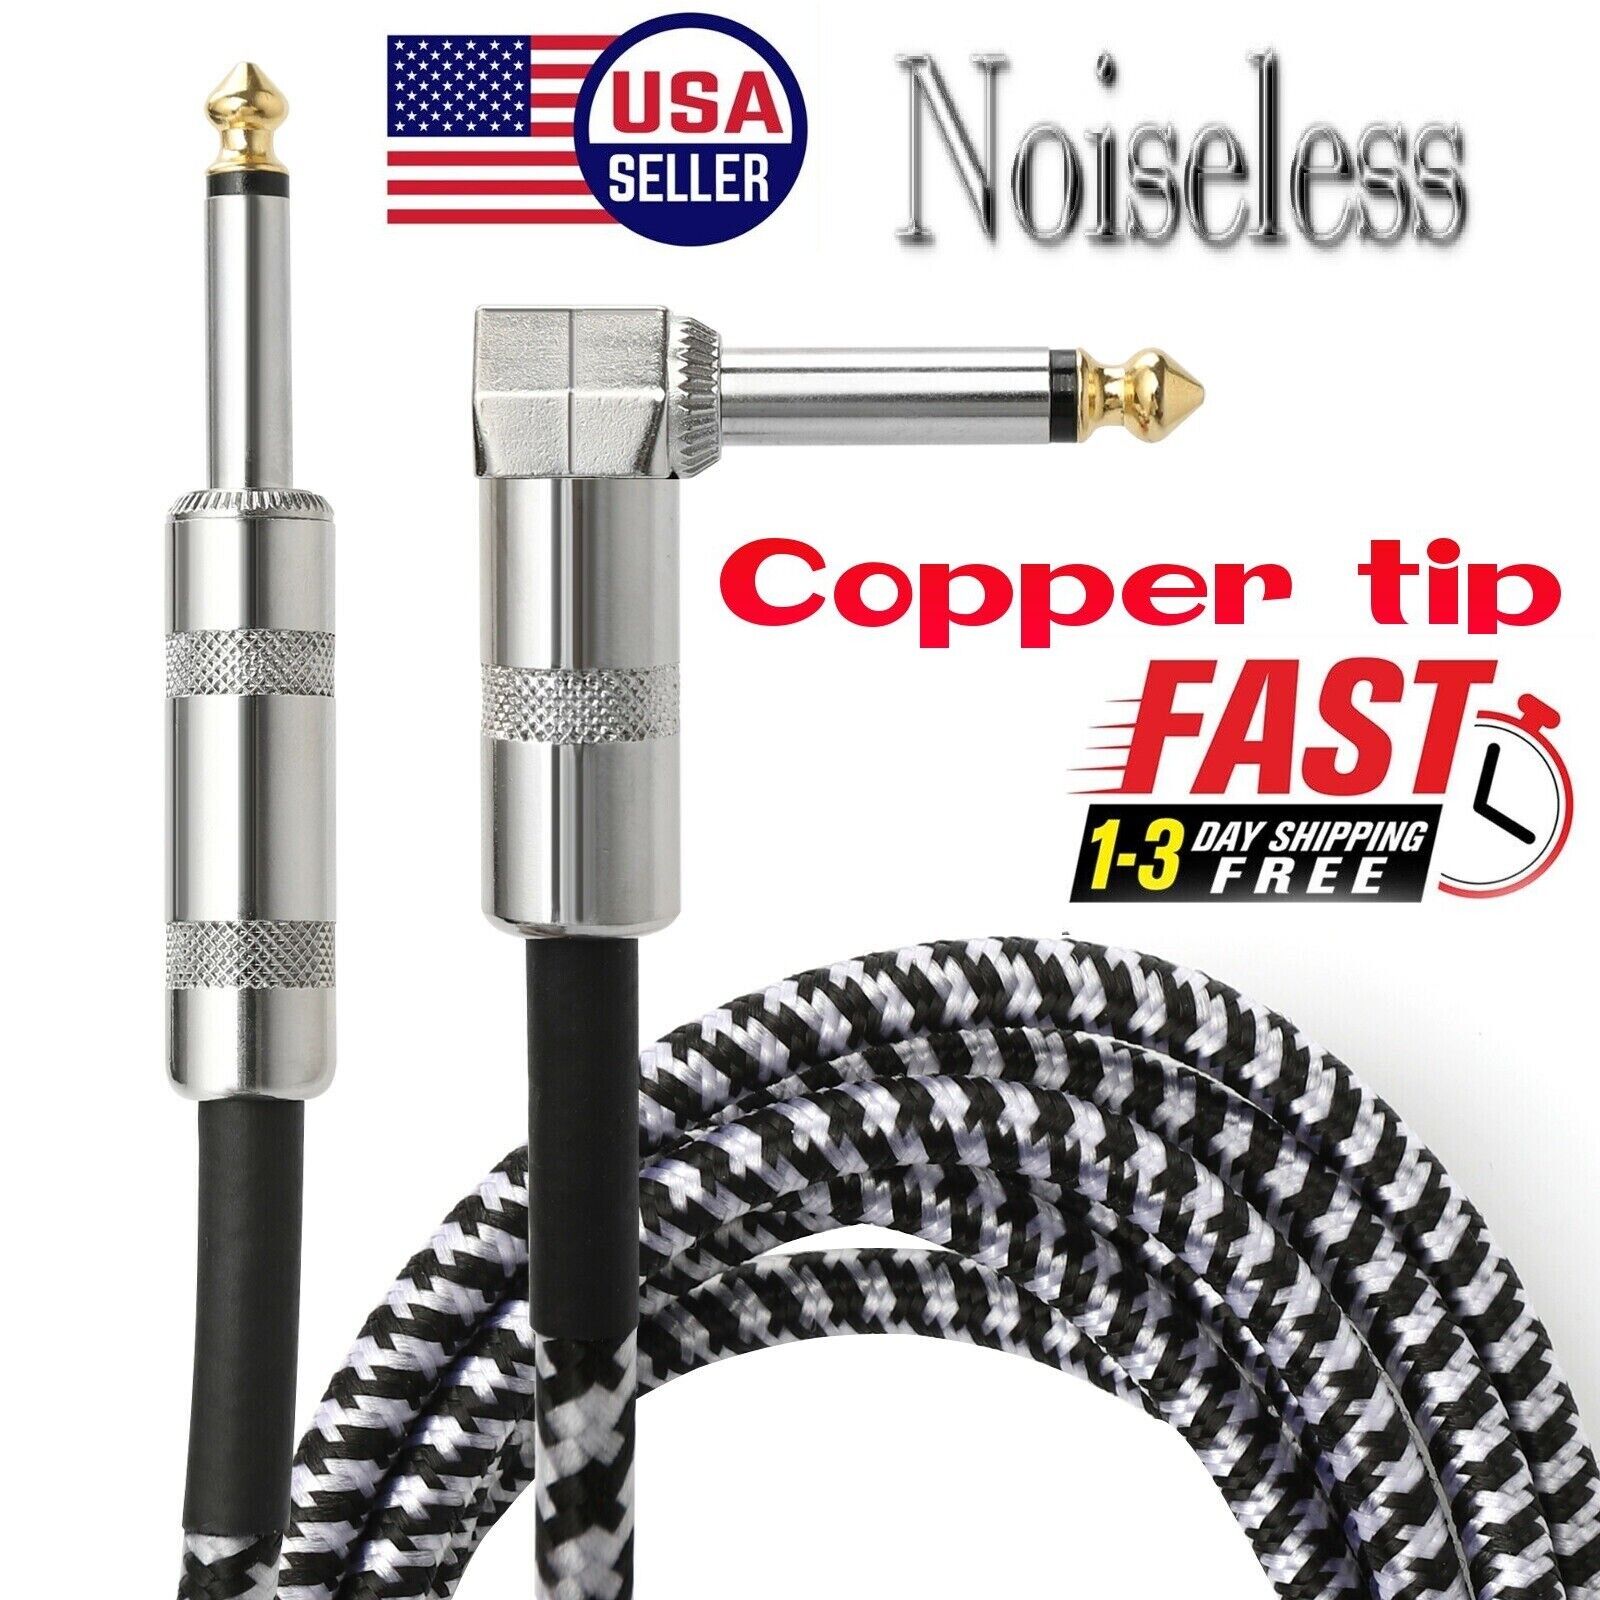 NEW 10ft NOISELESS Electric Guitar Bass Cable Pedal AMP Cord 1/4" USA KEYBOARD